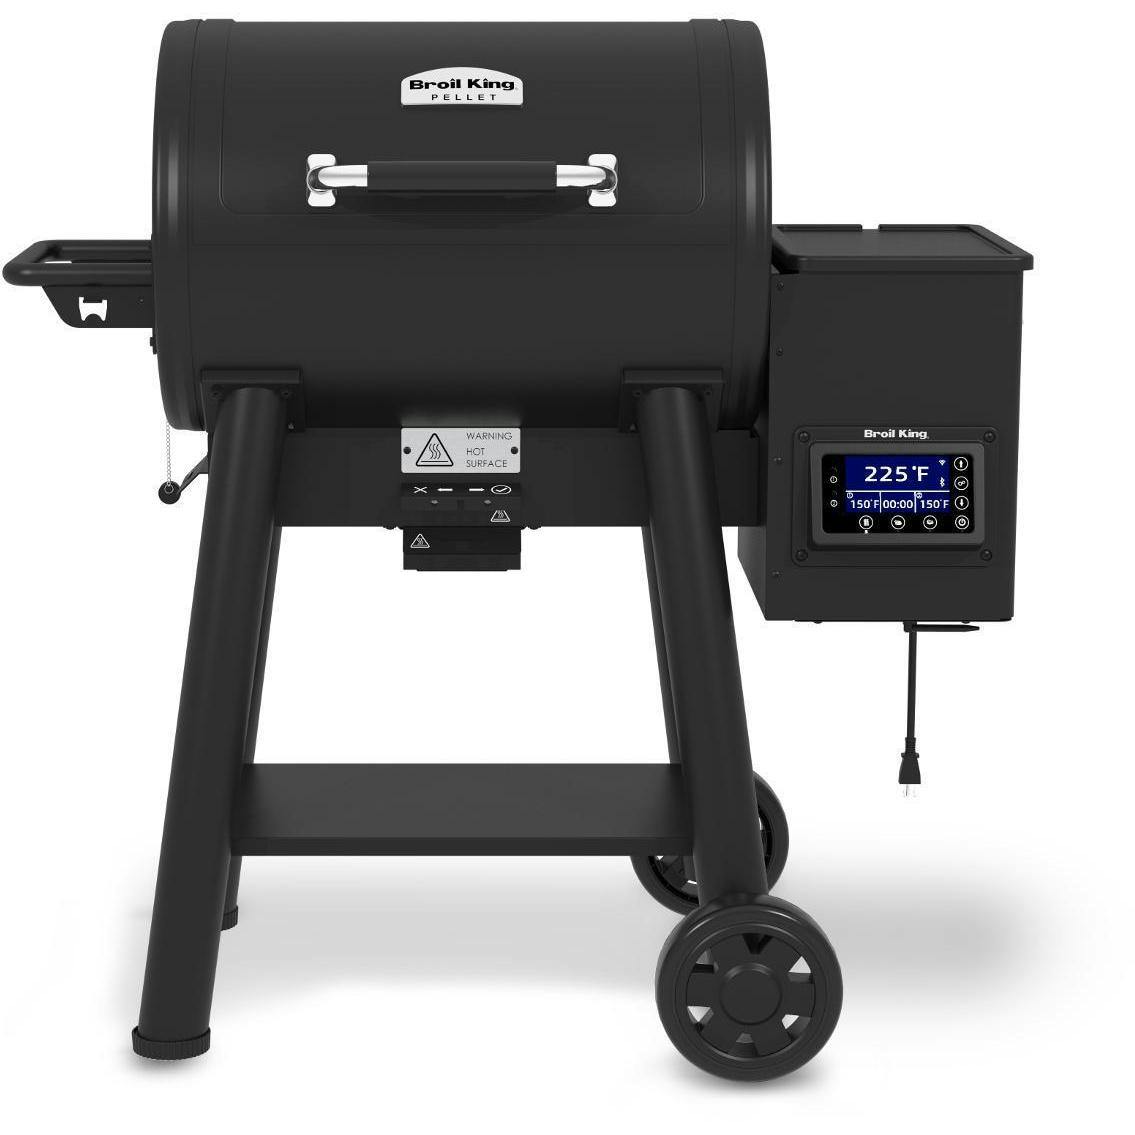 Broil King Crown Wi-Fi & Bluetooth Controlled Pellet Grill